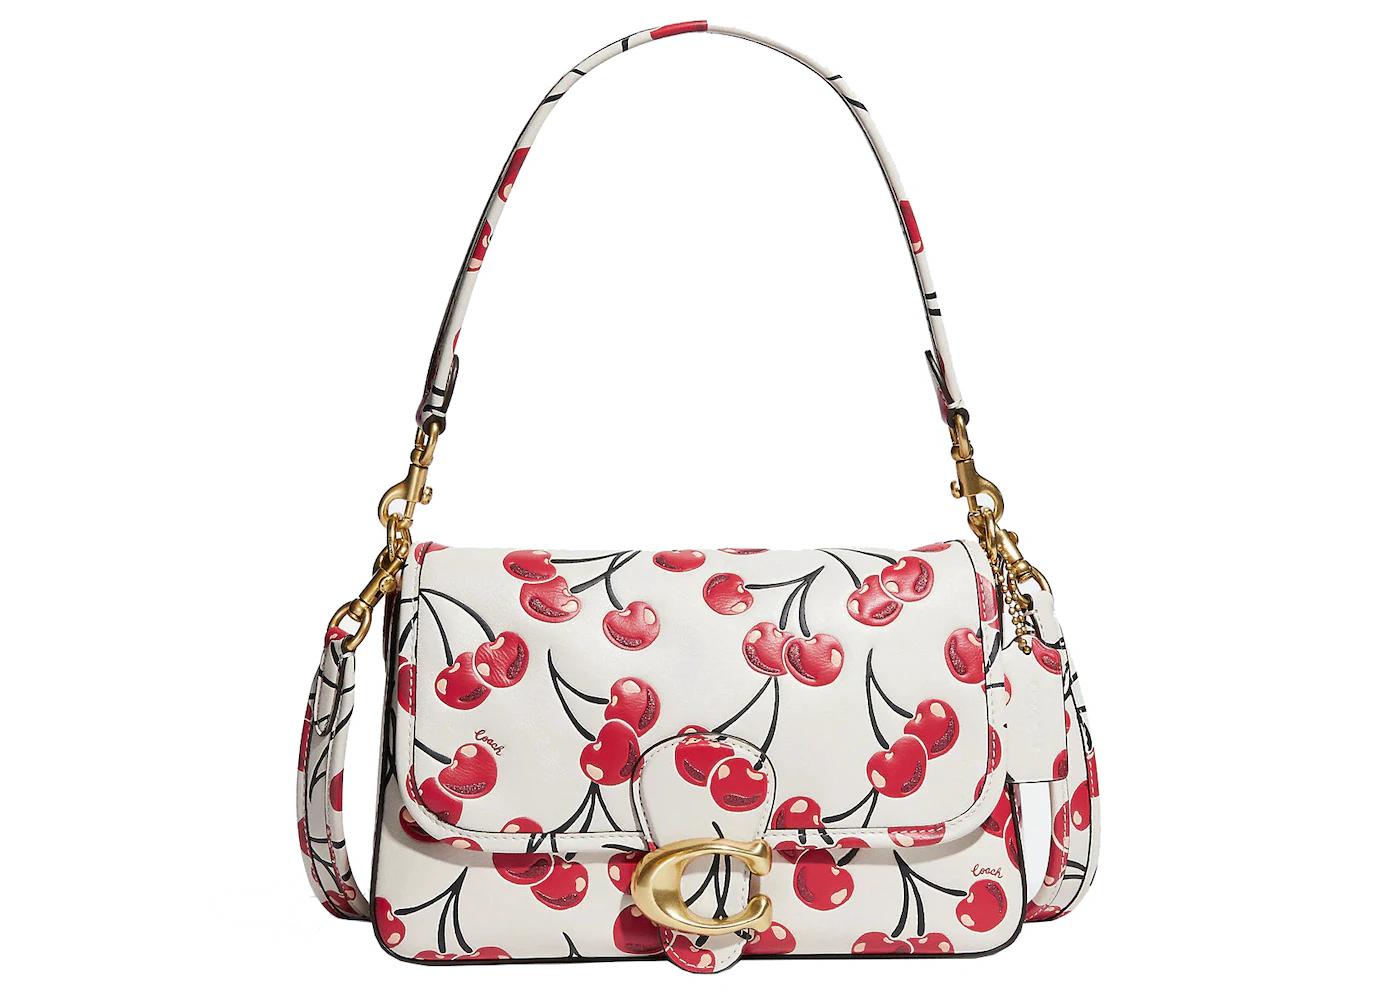 Soft Tabby Shoulder Bag With Cherry Print Chalk/Multicolor by COACH